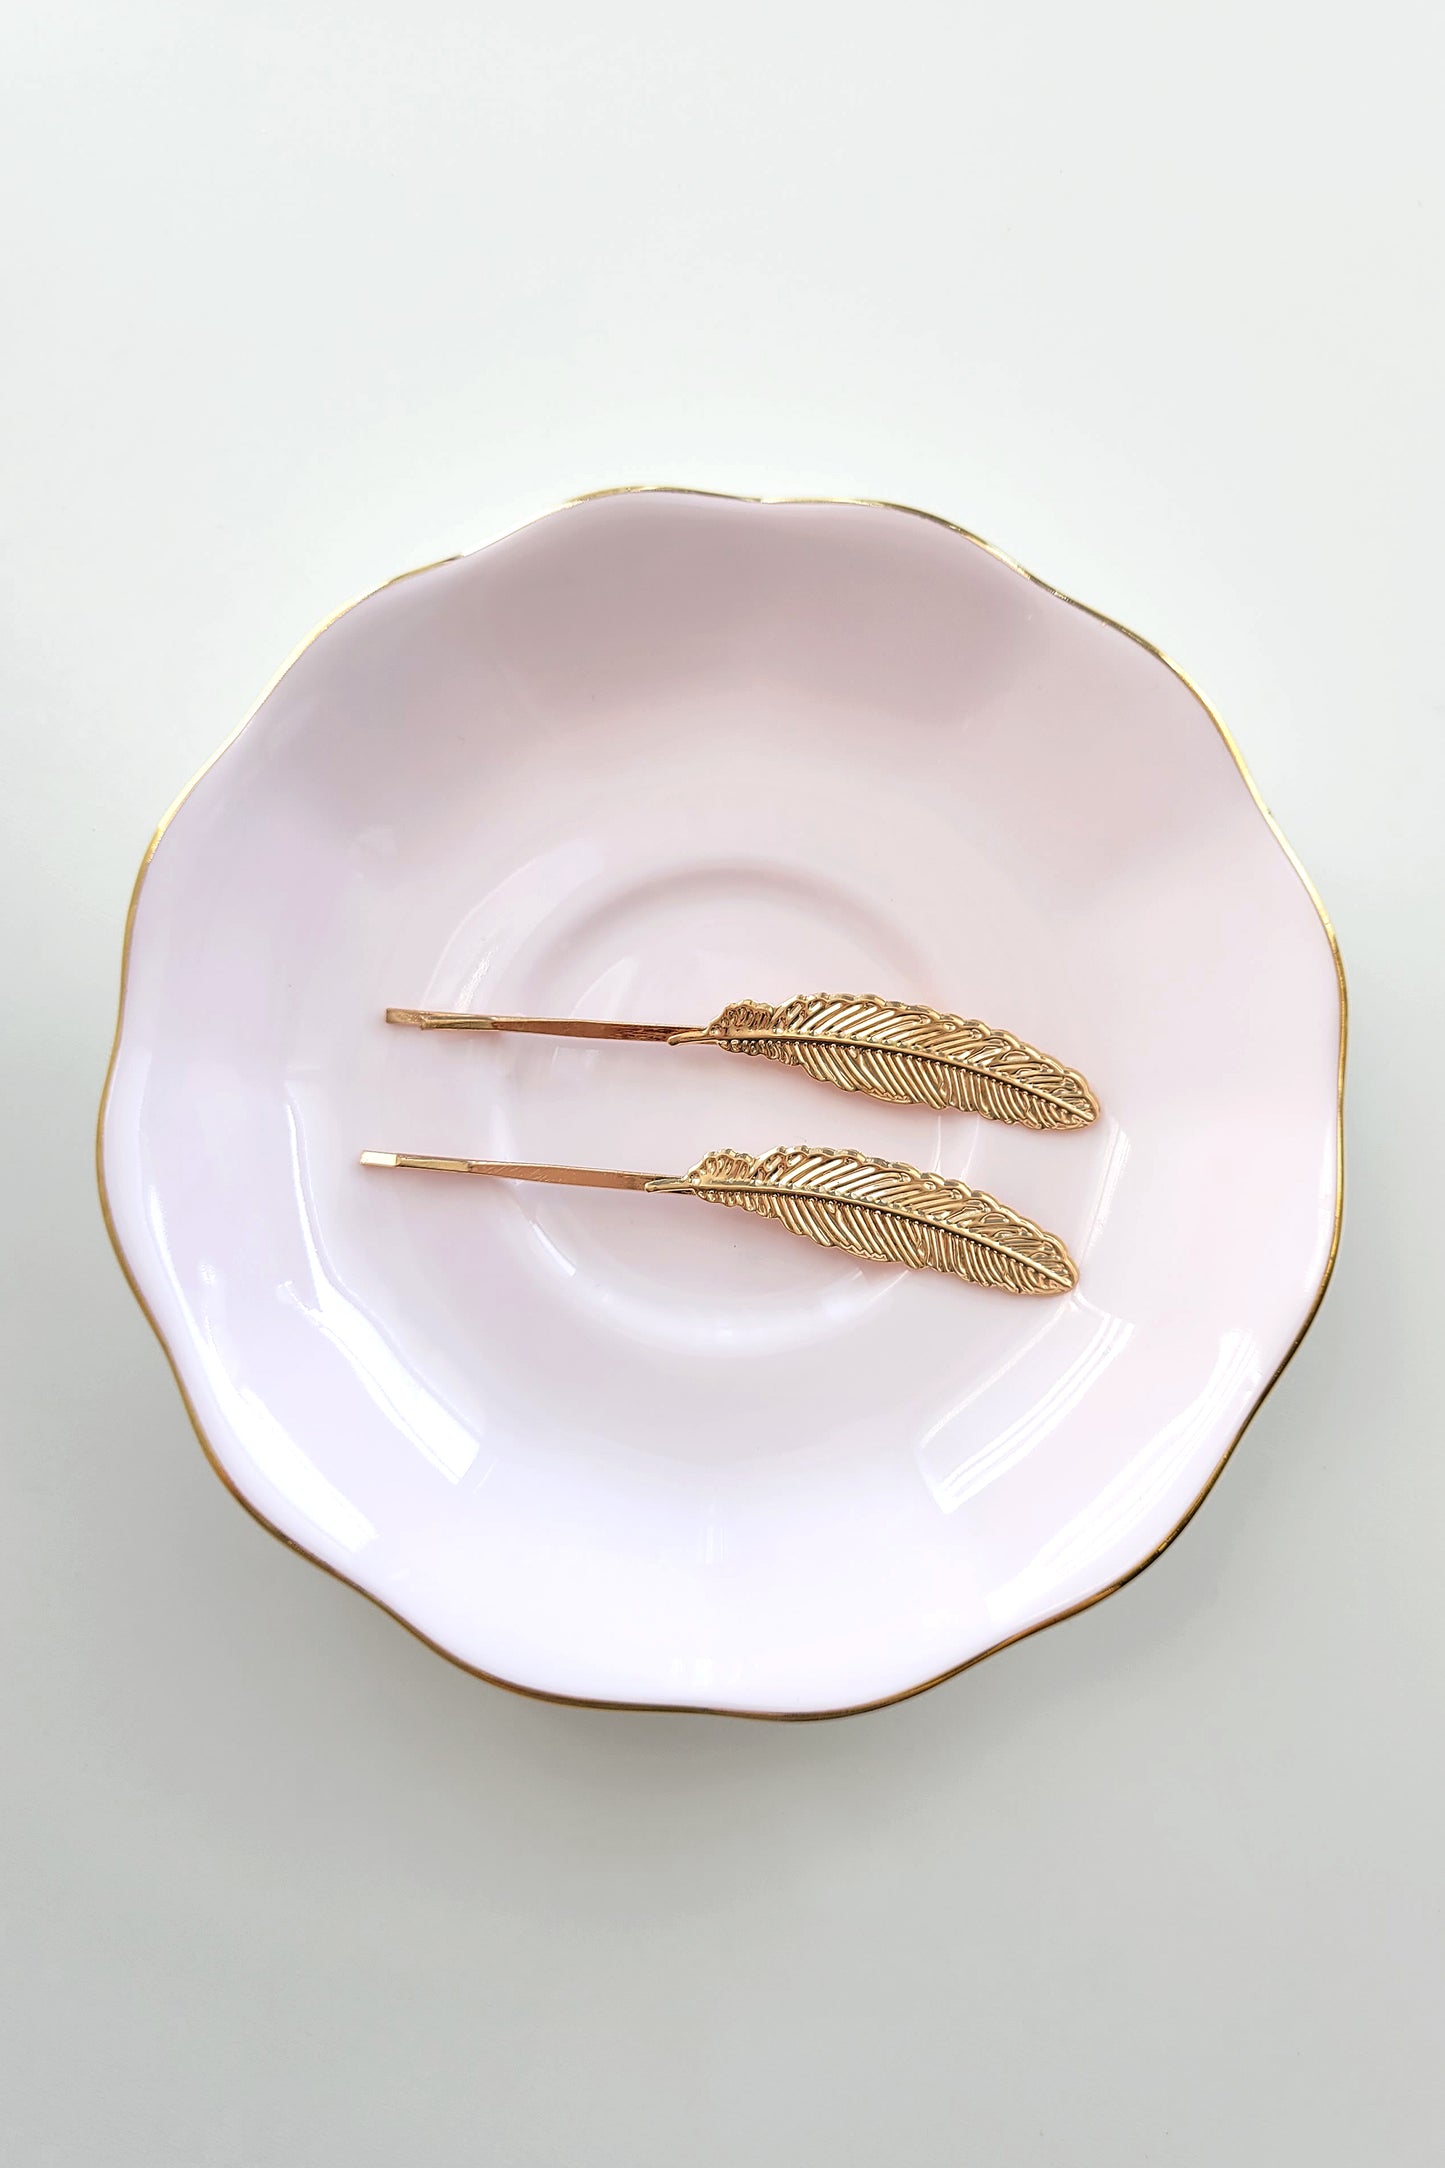 Feather Hair Pin - Set of 2